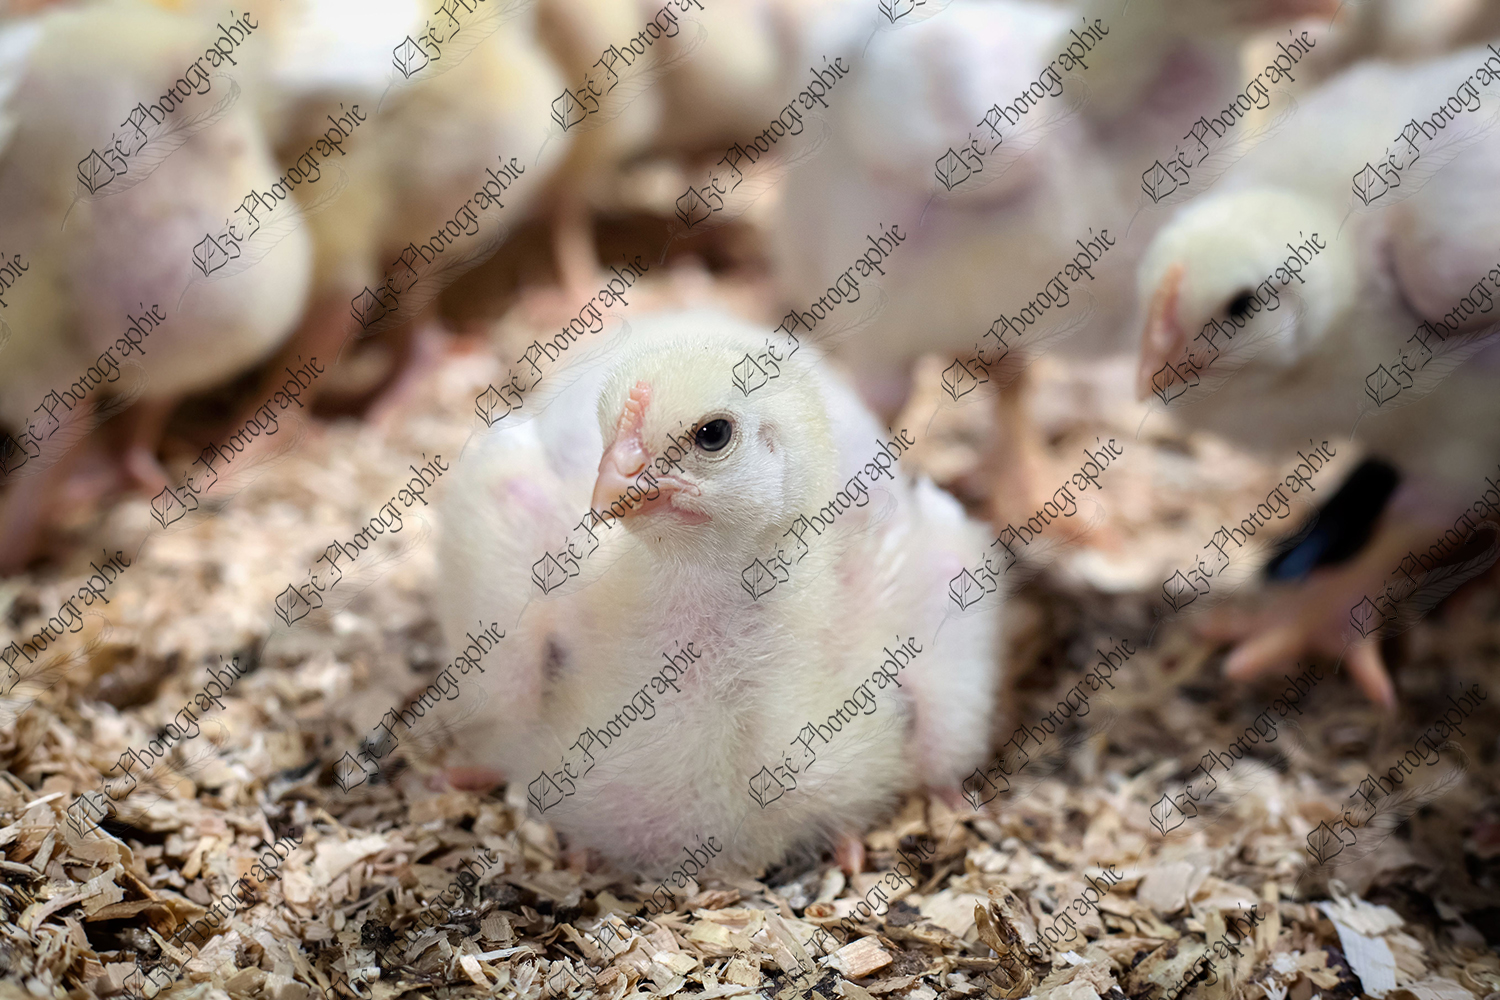 elze_photo_9213_litiere_poussin_repos_chick_lying_wood_shavings